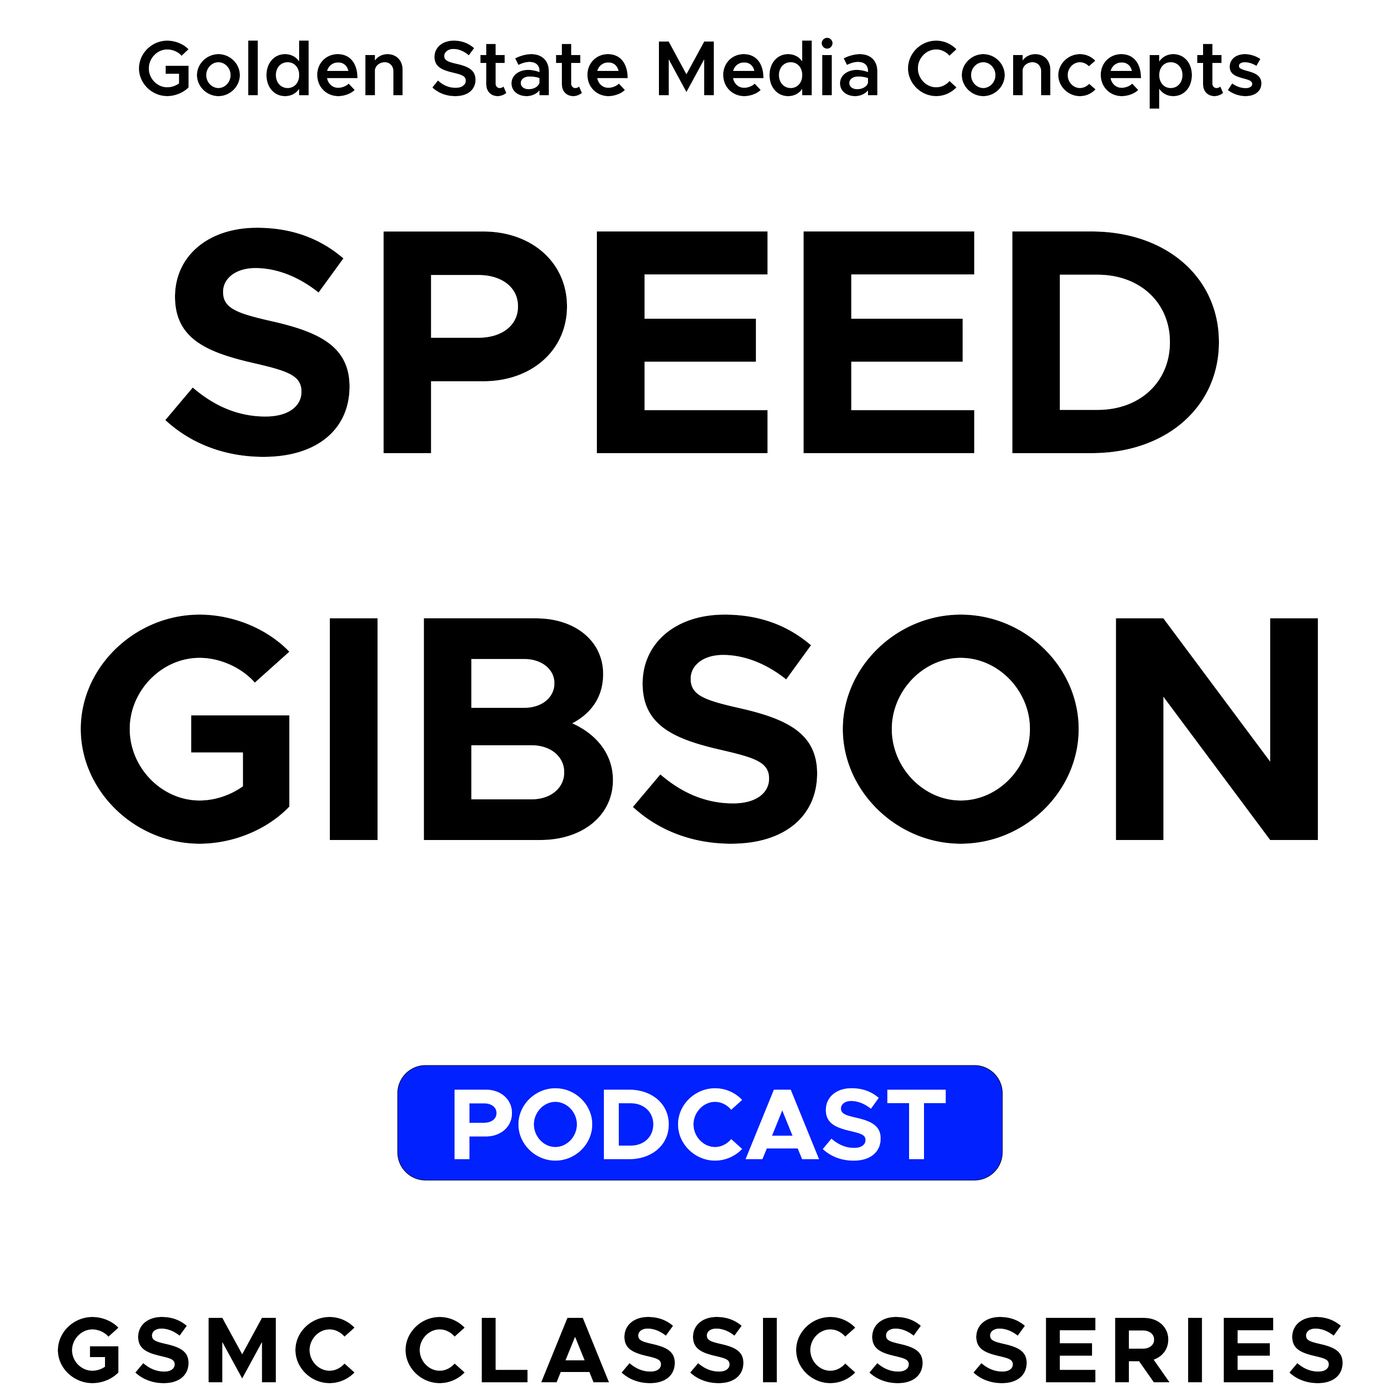 GSMC Classics: Speed Gibson Episode 58: Death Ray Blown Up